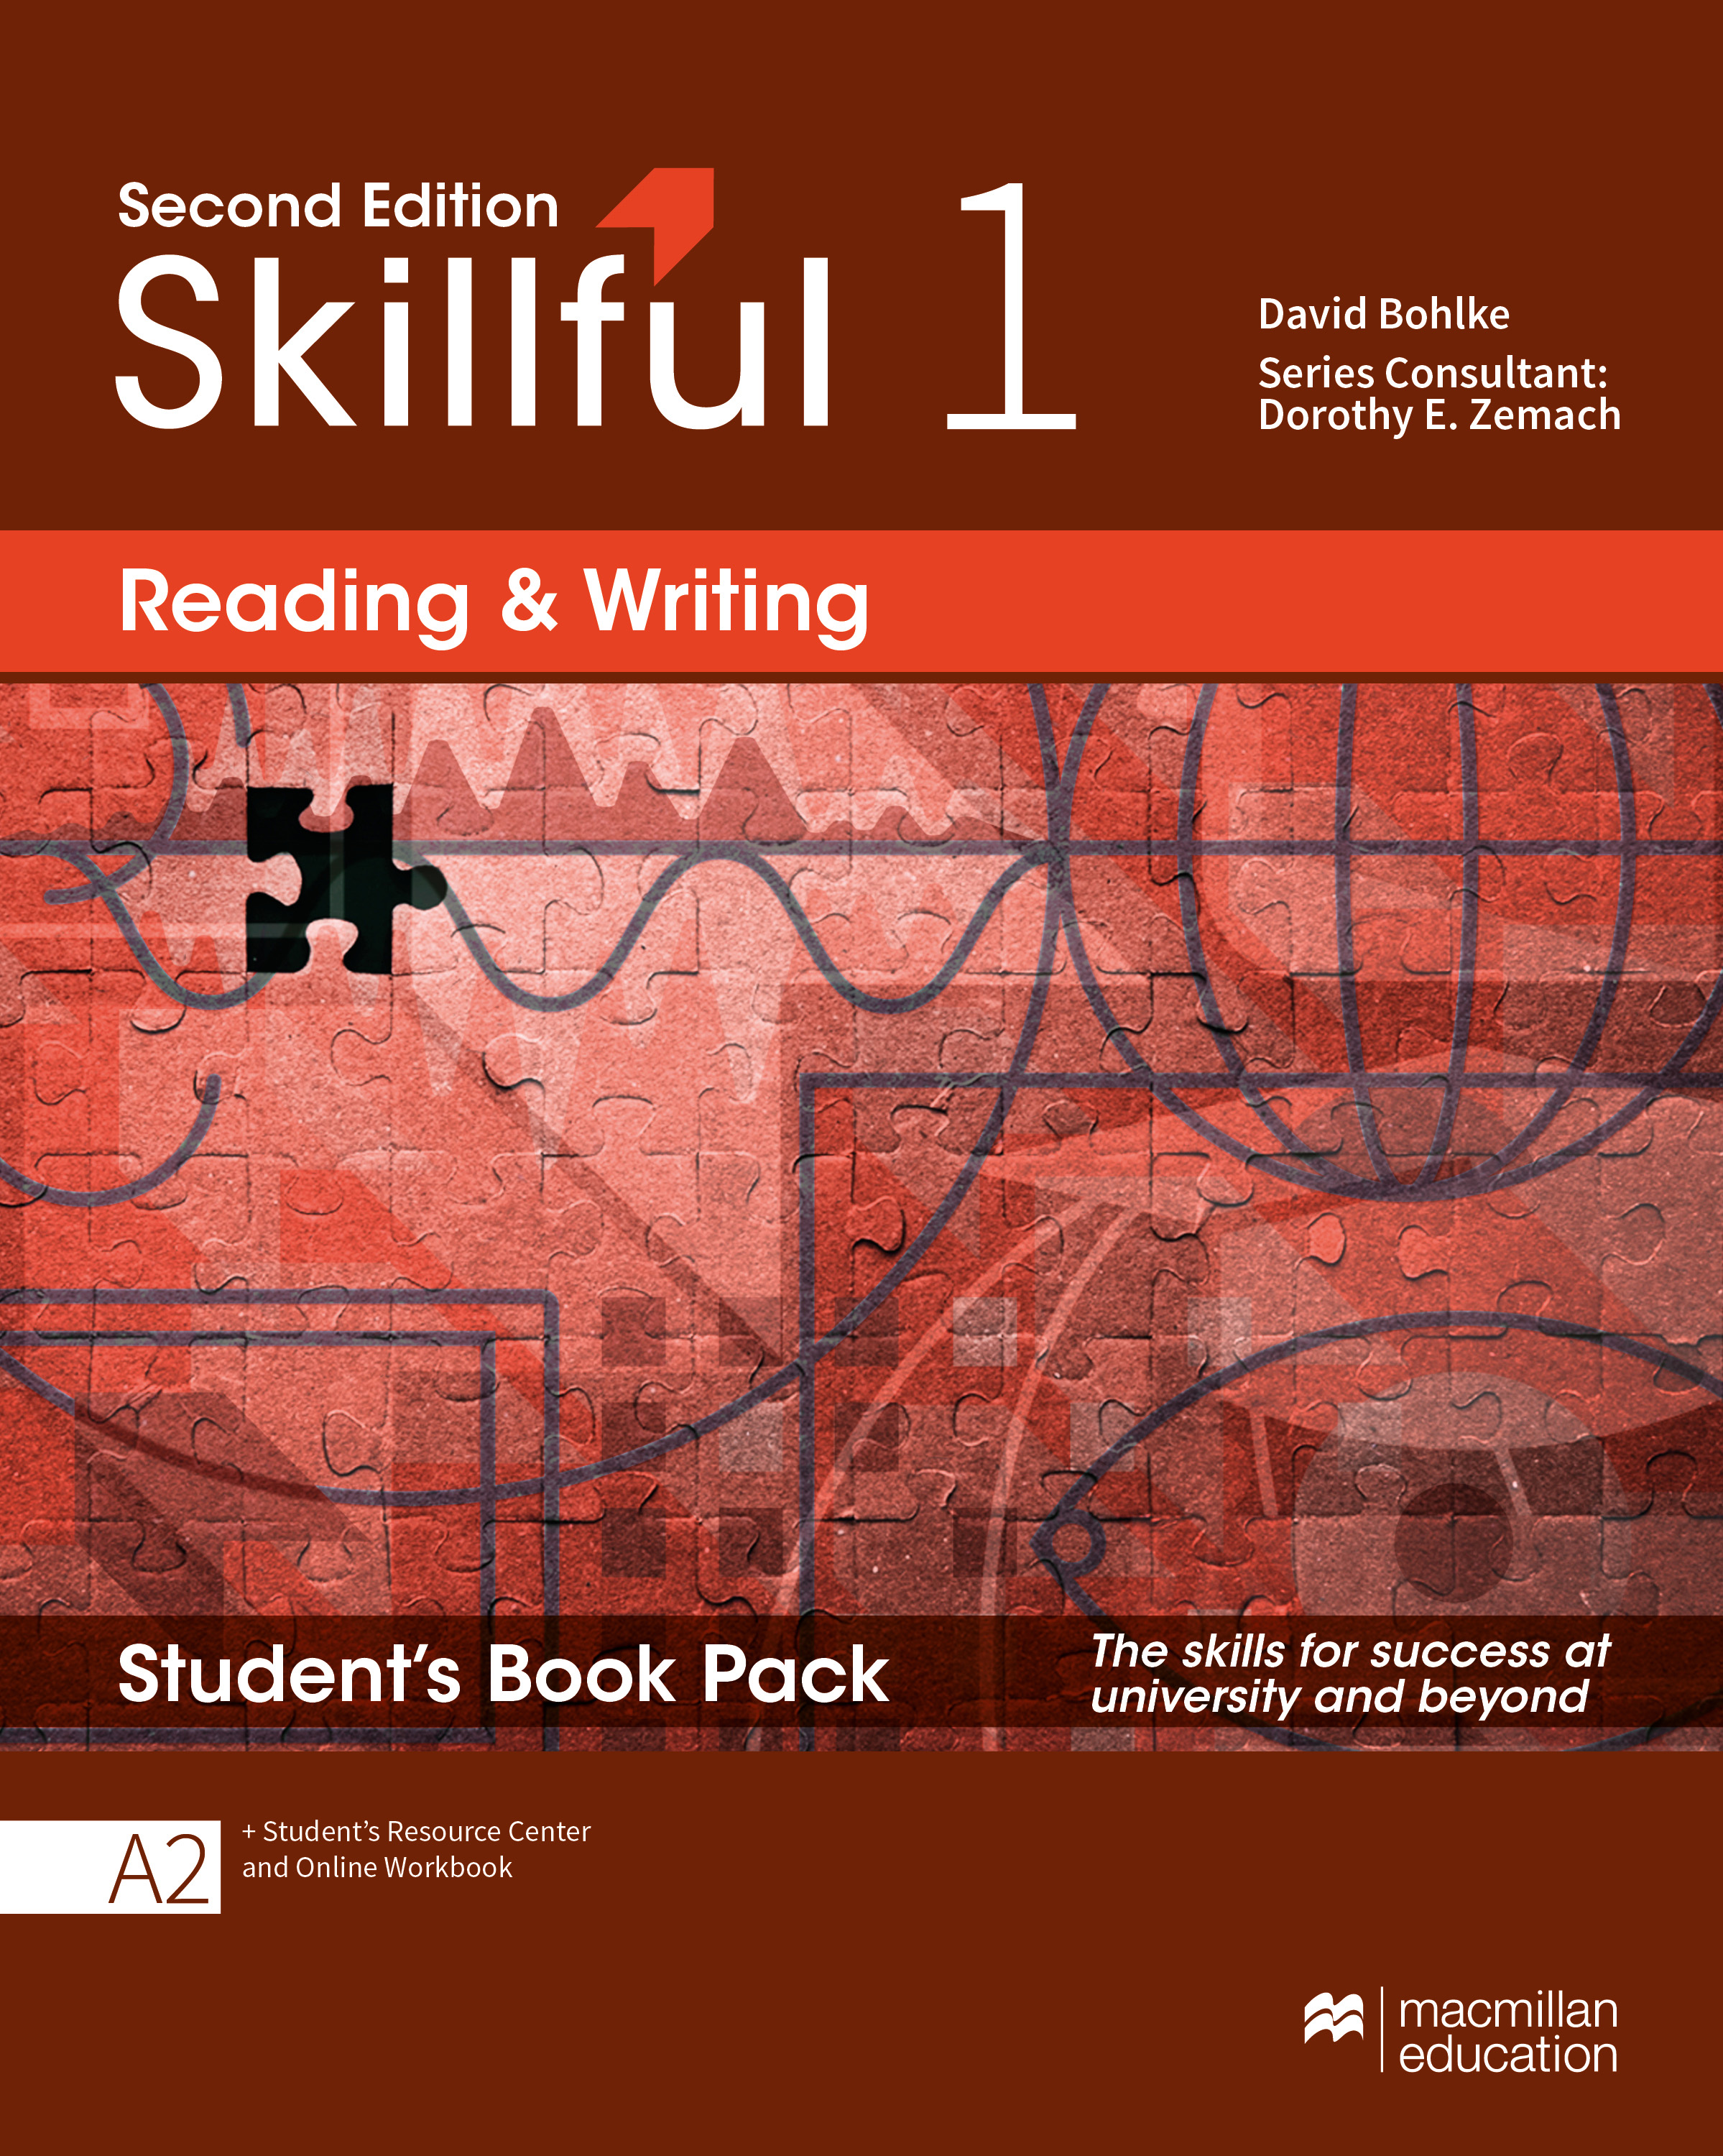 Very skillful. Skillful 1 reading and writing. Skillful Macmillan. Skillful 1. Skillful reading and writing students book 1.